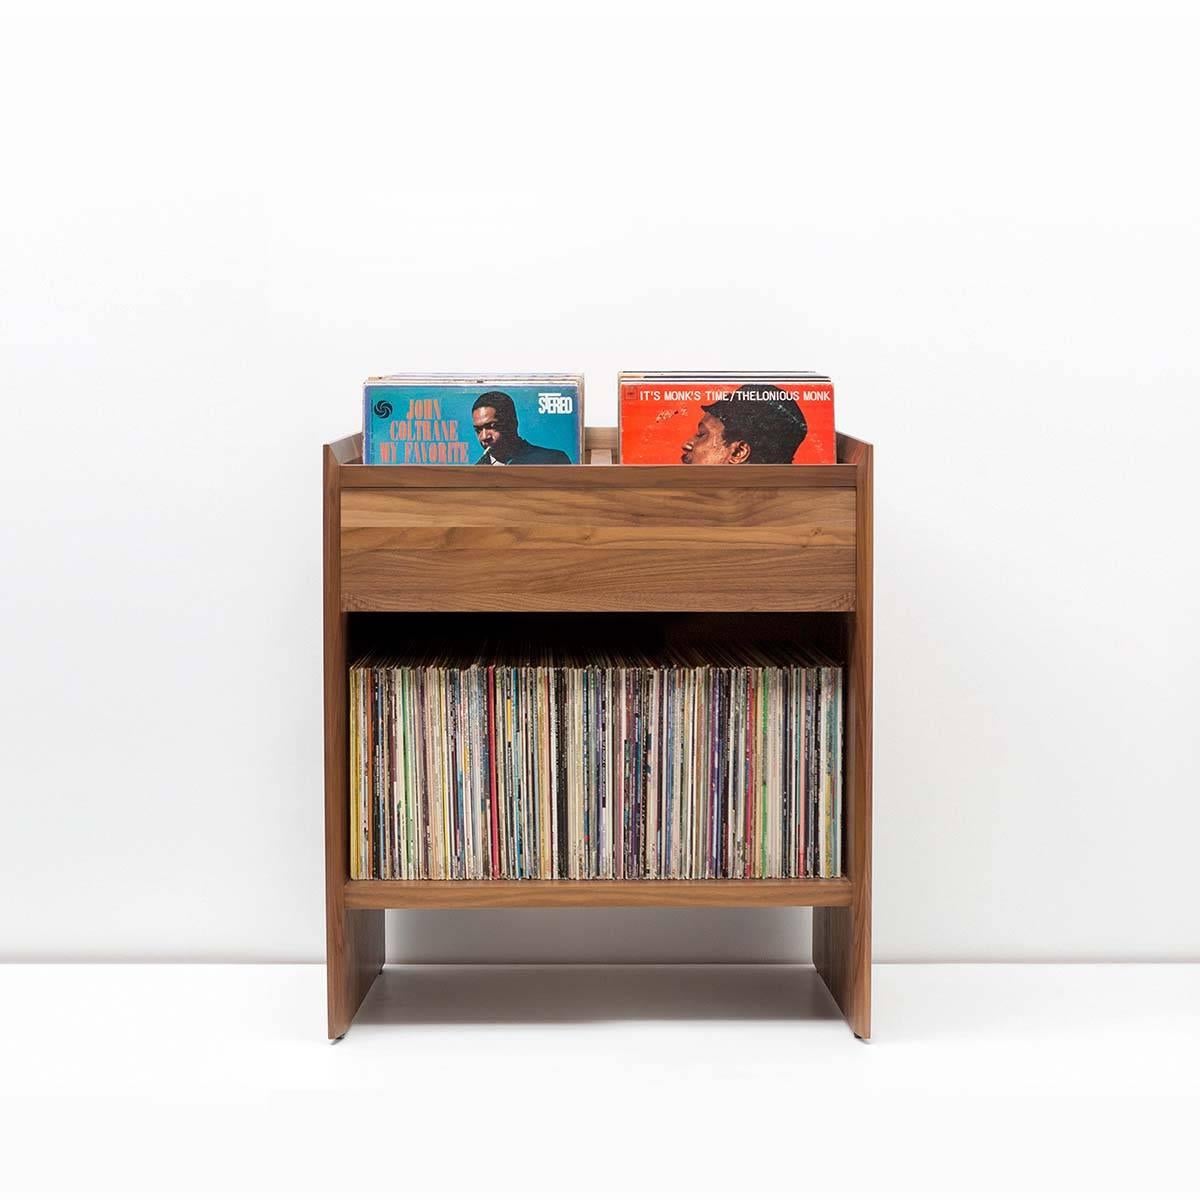 The Unison Vinyl Record Storage Cabinet is a perfect stand alone solution for vinyl record storage or it also makes a great companion to any Unison Record Stand allowing additional storage for your expanding record collection. Convenient “flip”